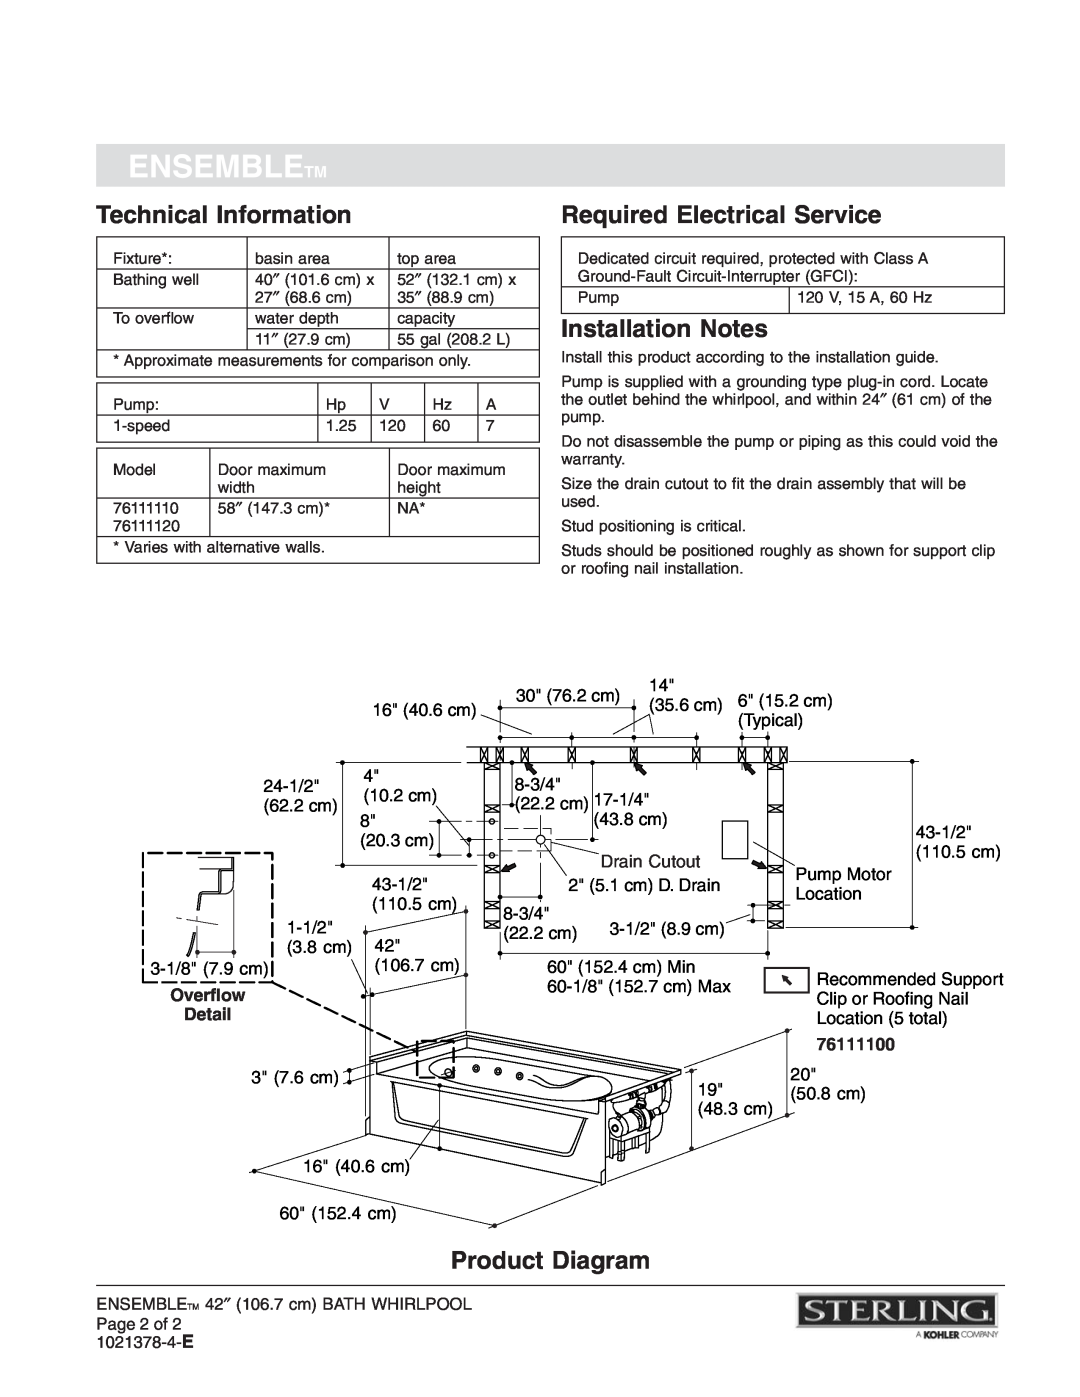 Sterling Plumbing 76111120 warranty Technical Information, Required Electrical Service, Installation Notes, Product Diagram 